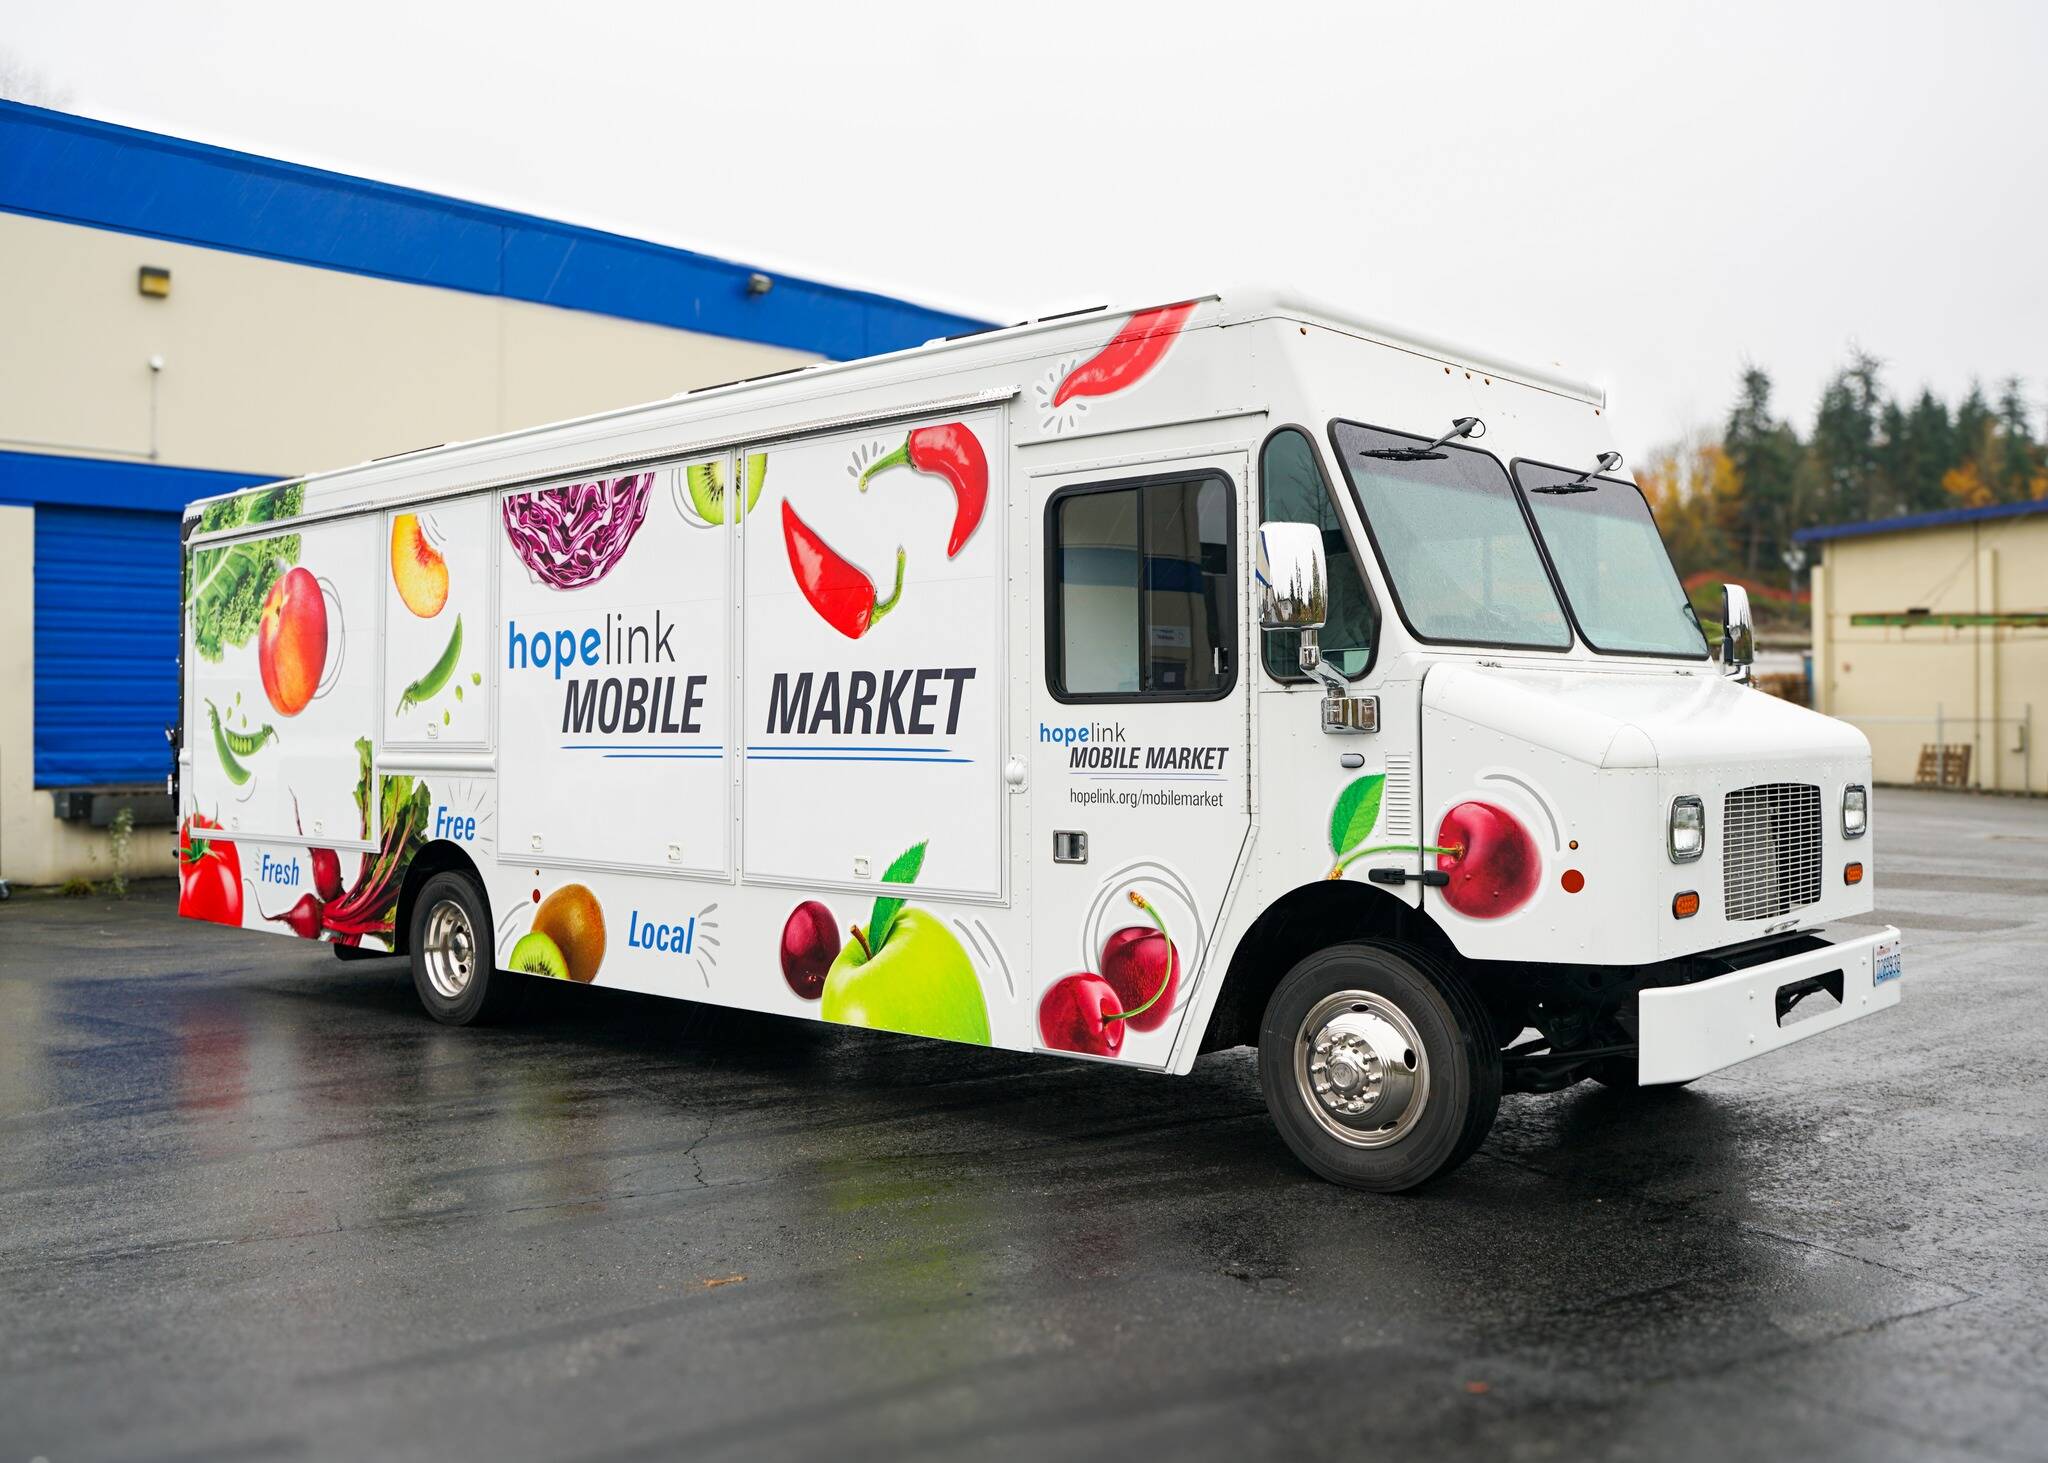 Hopelink’s Mobile Market truck will soon be coming to the Island. Photo courtesy of the city of Mercer Island